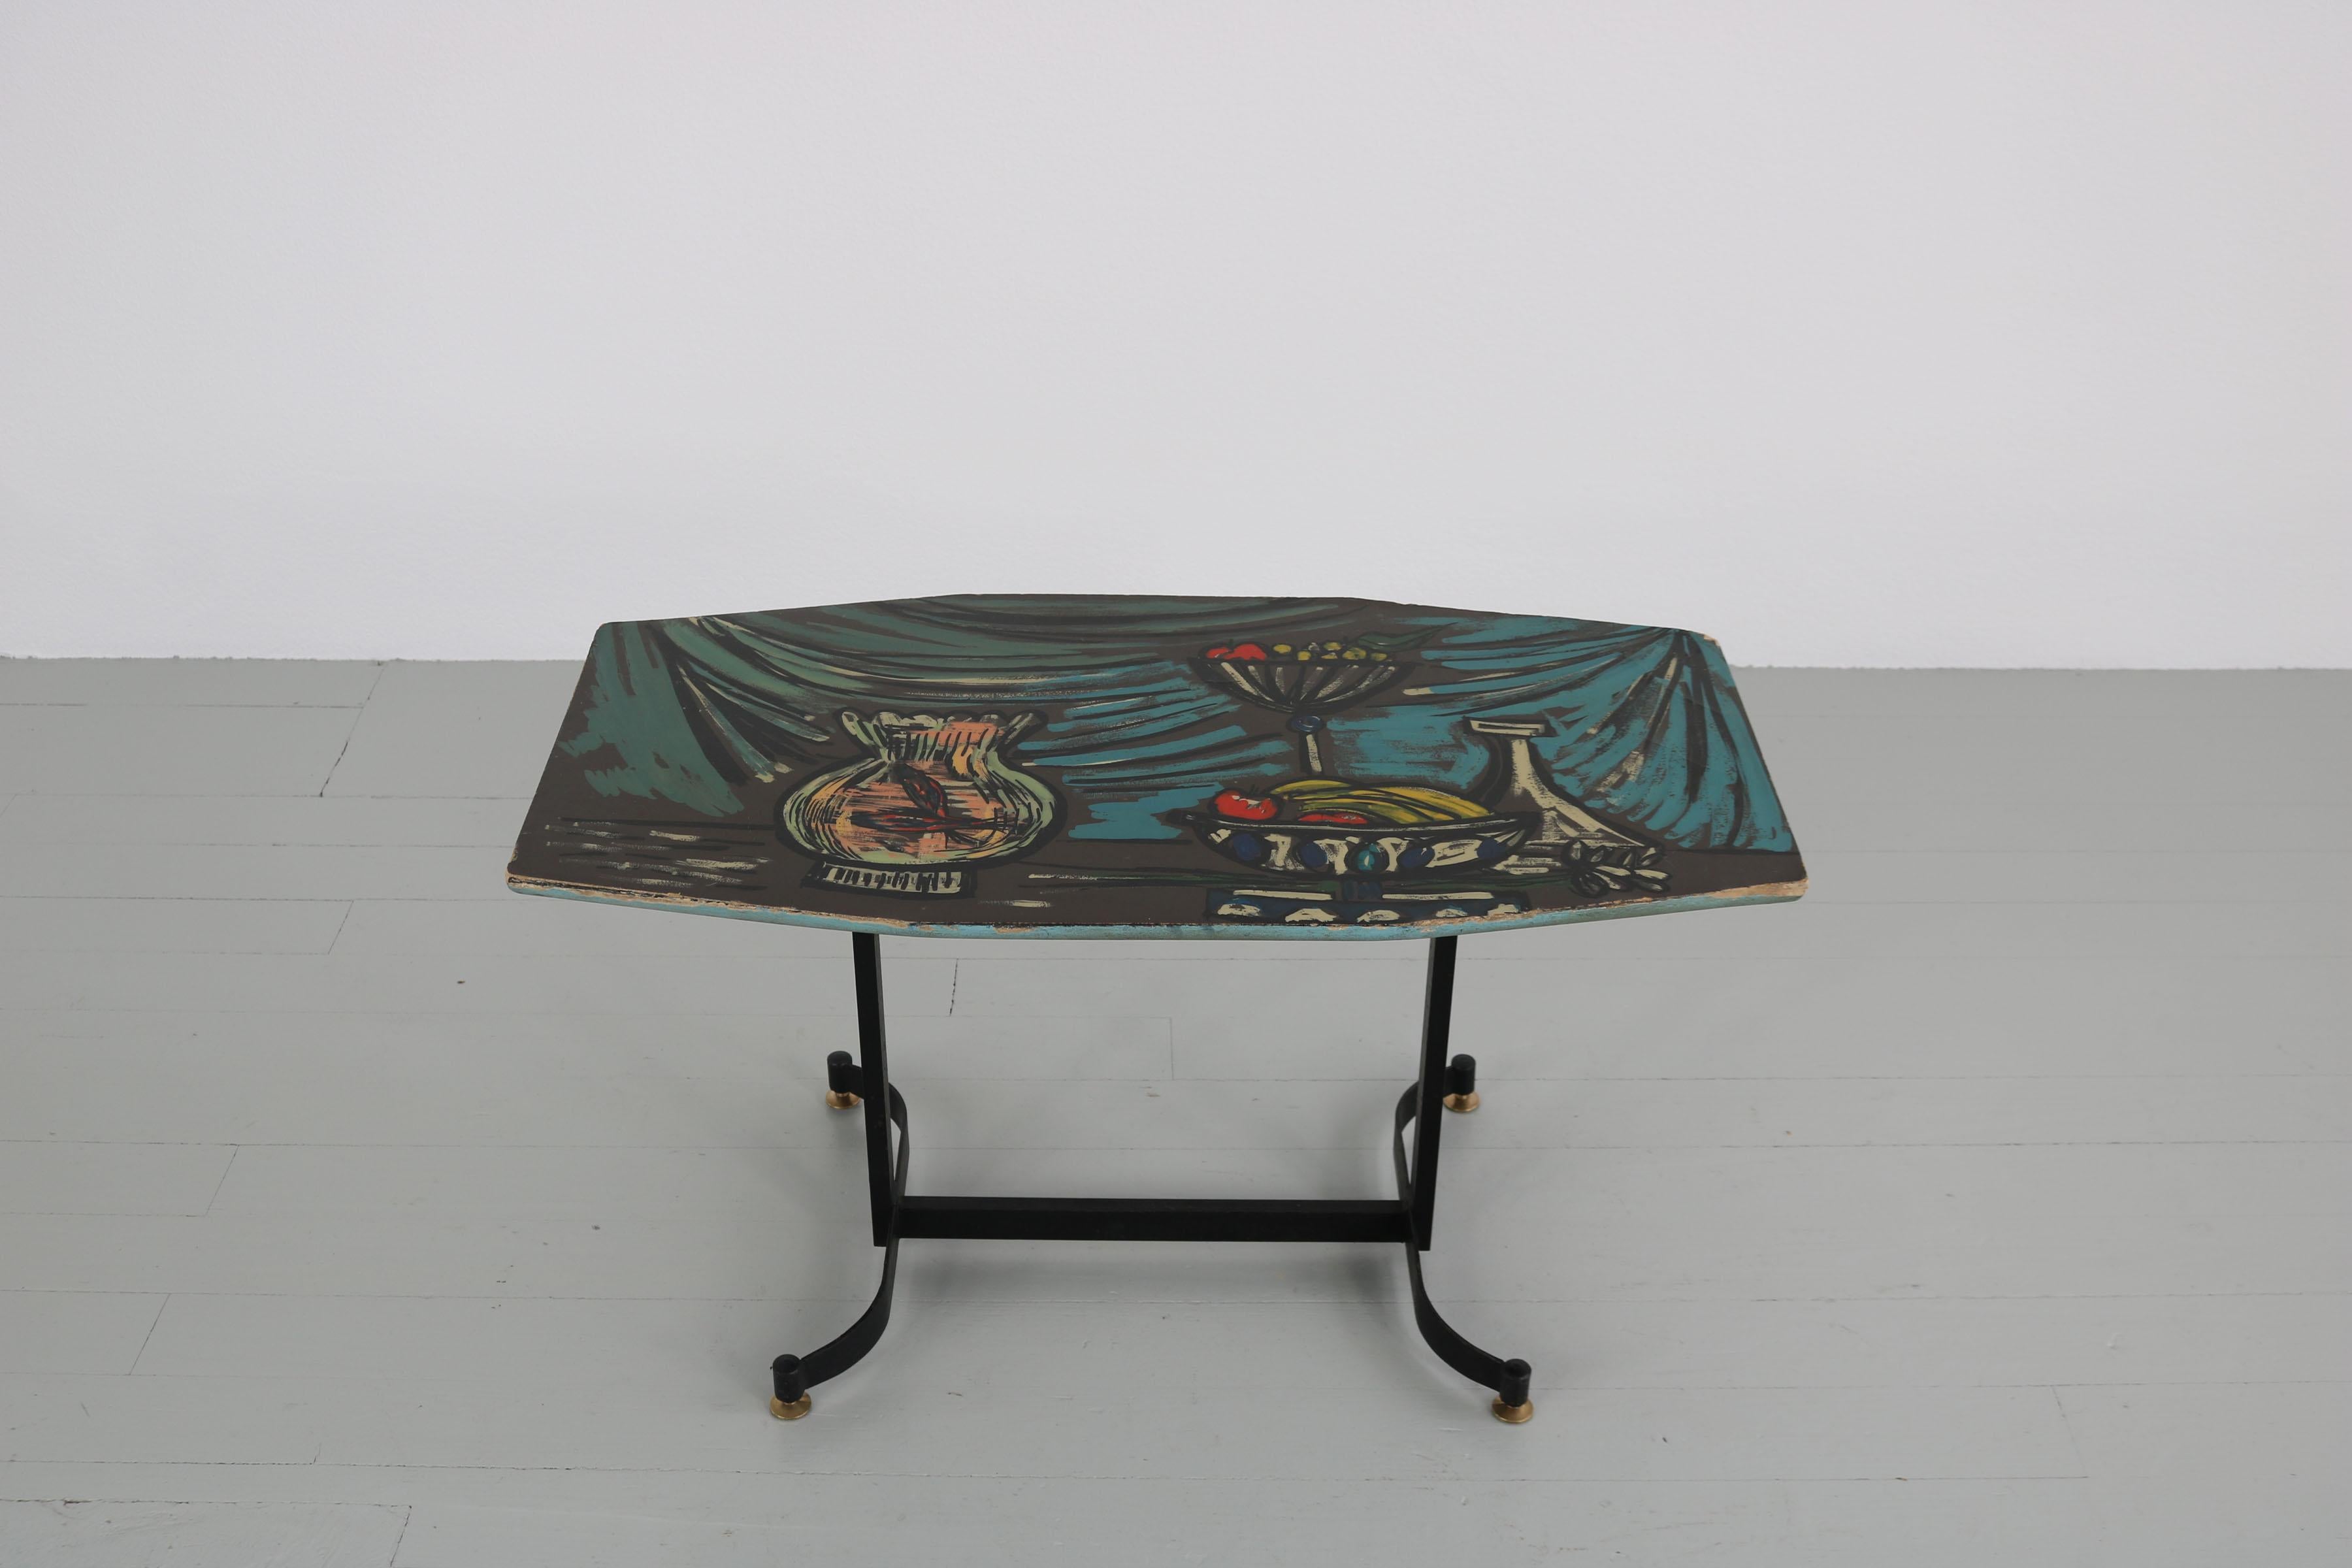 Italian Dark Sofa Table with Colorful Hand-Painted Motives on Table Top, 1950s For Sale 10